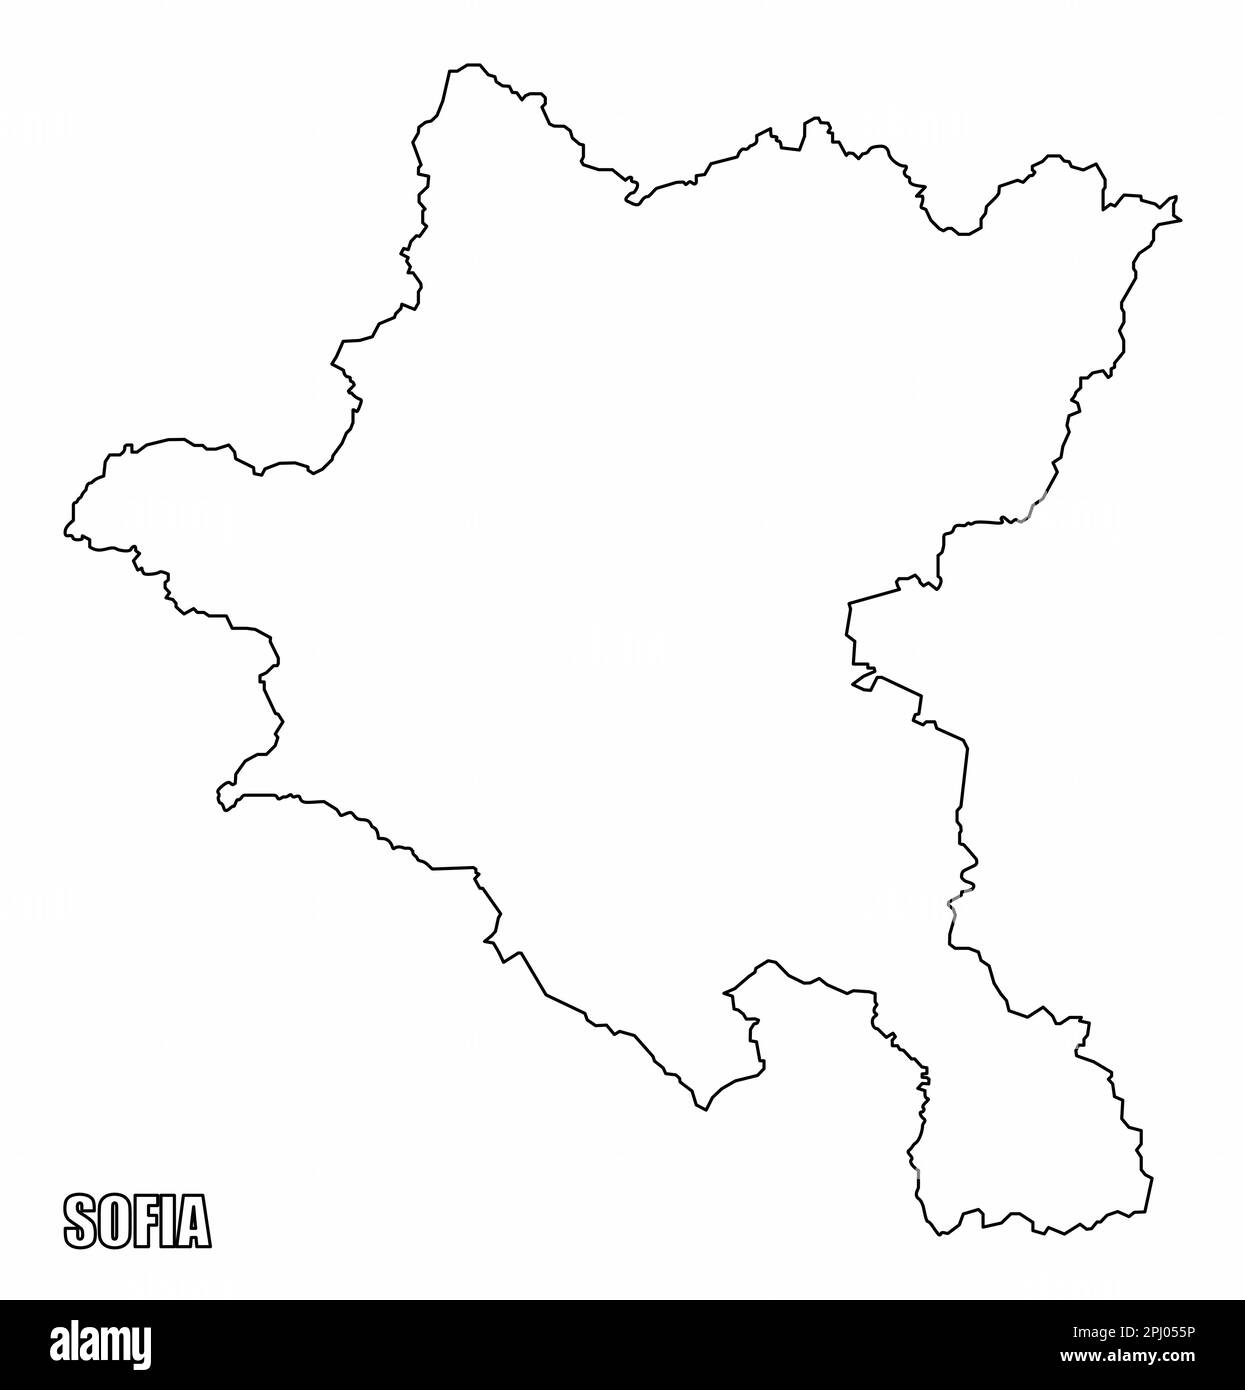 Sofia city outline map isolated on white background, Bulgaria Stock Vector